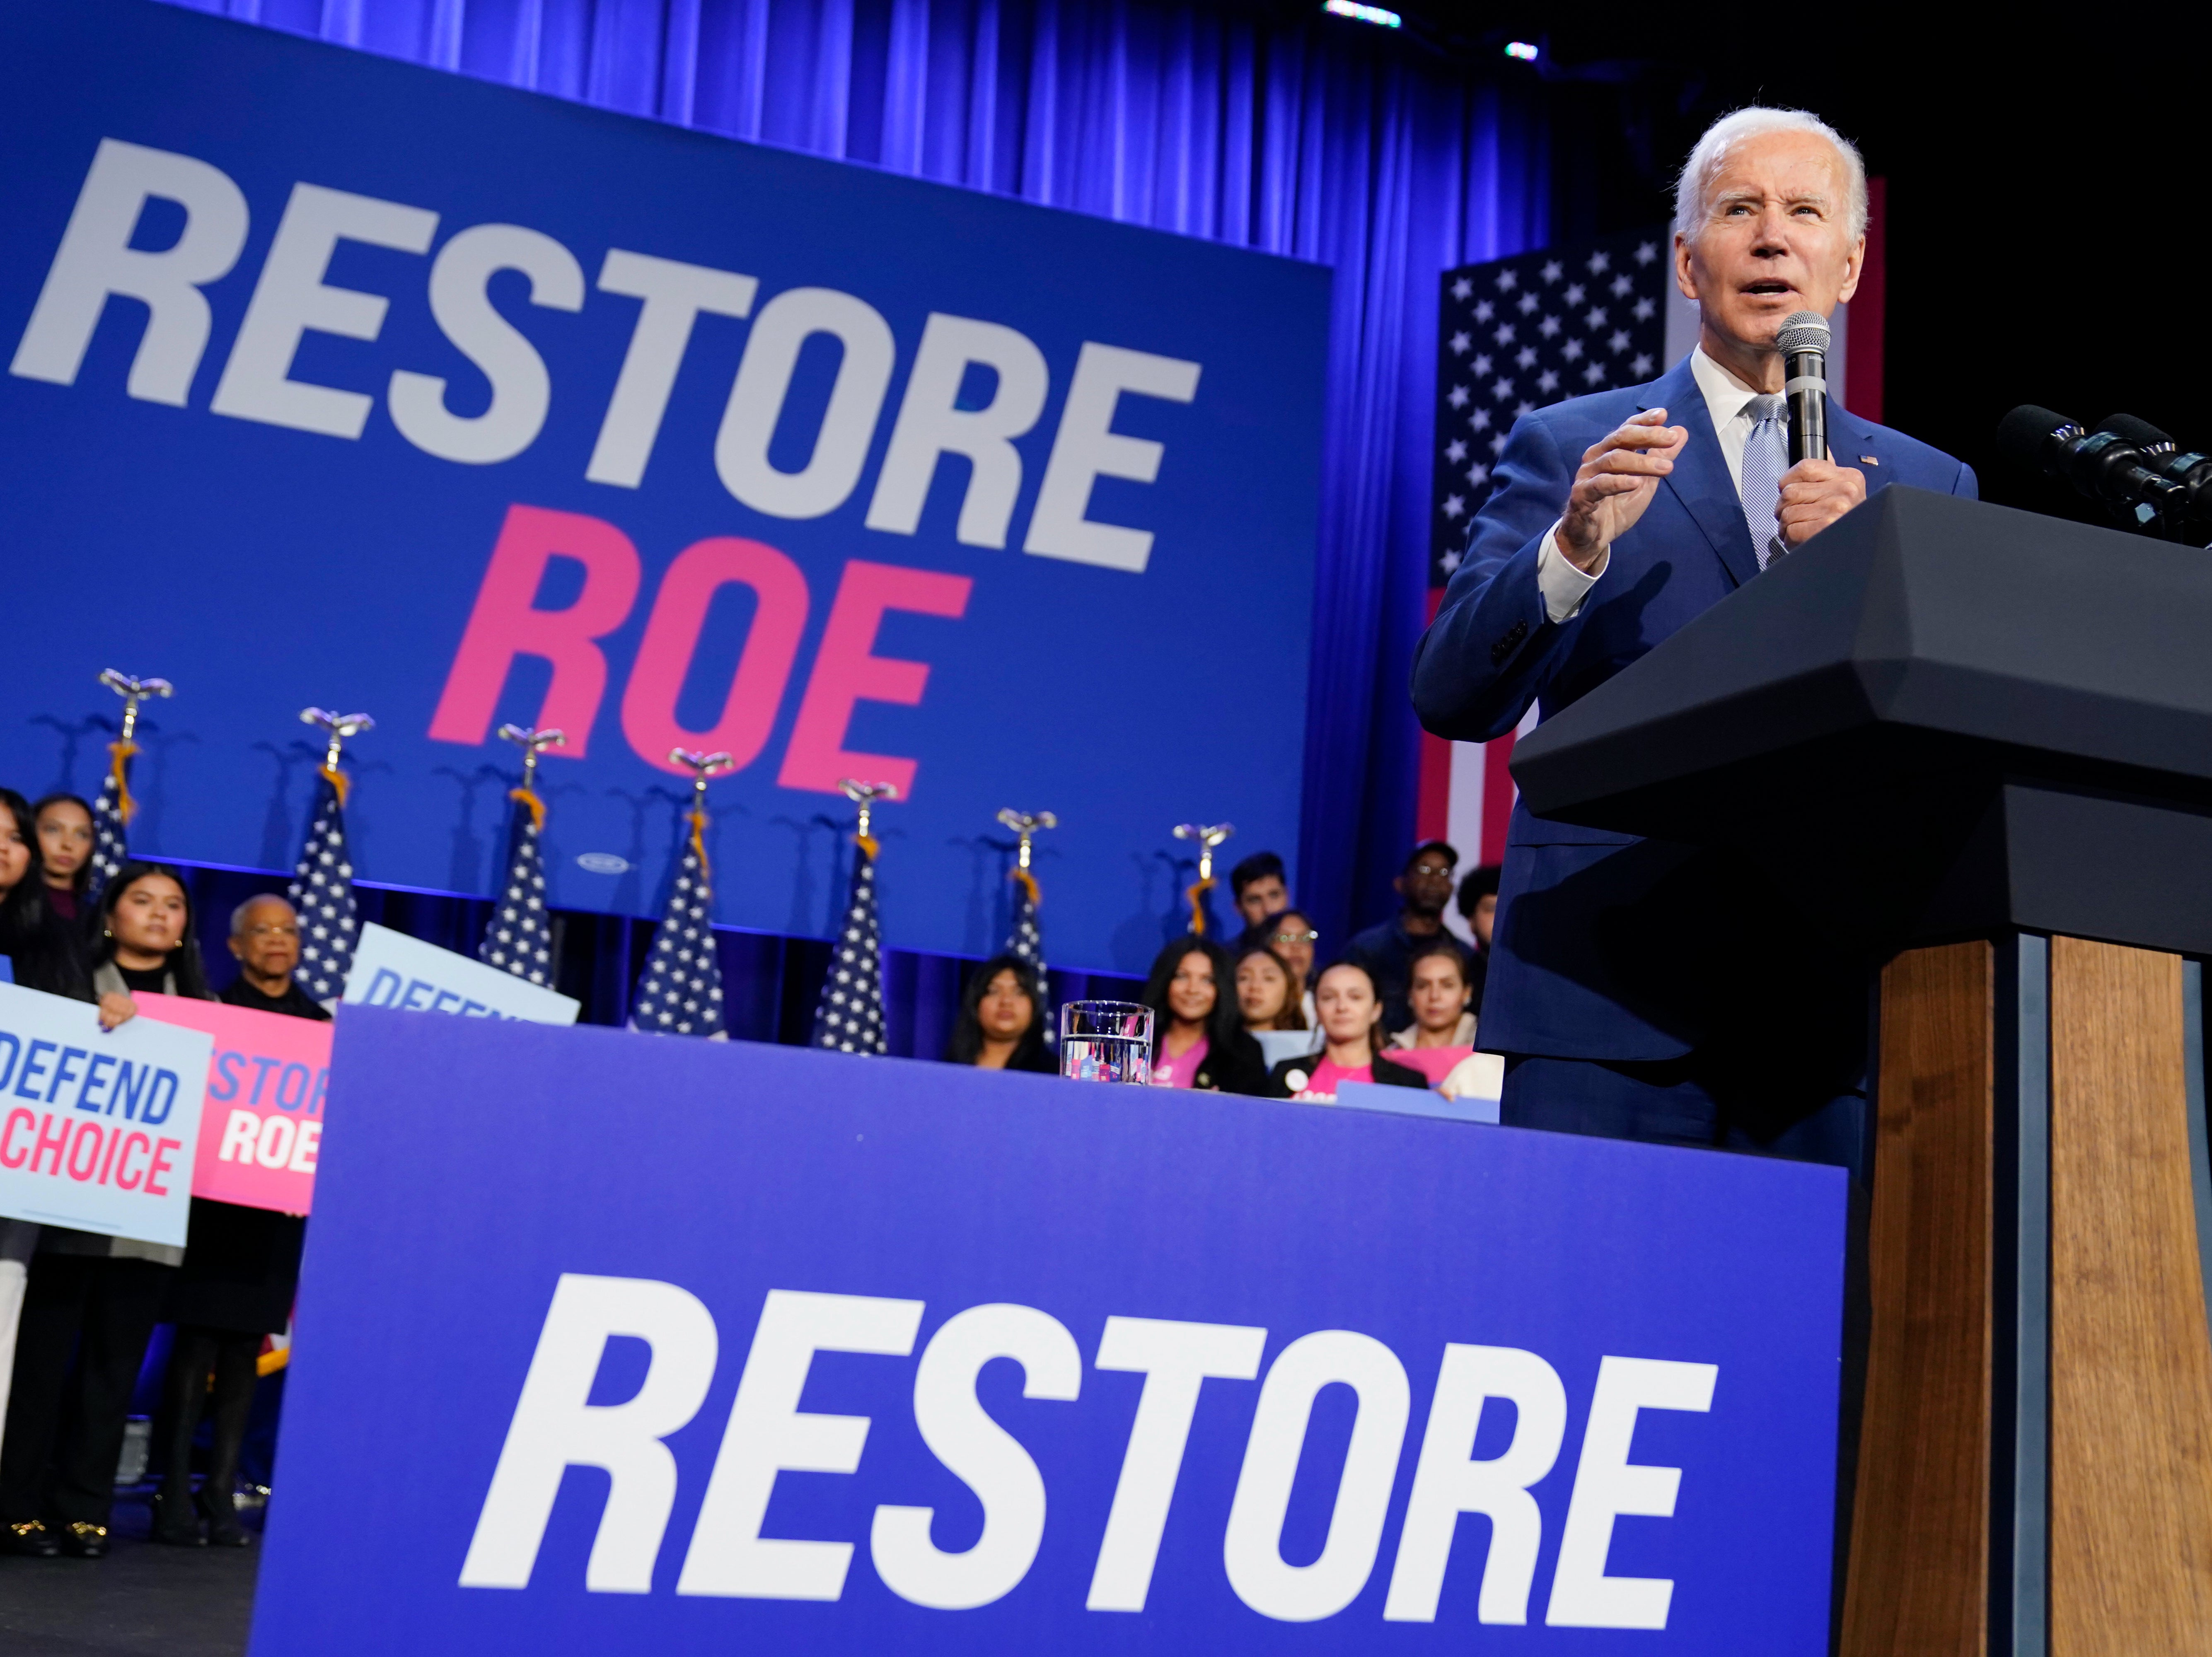 Joe Biden gives a speech promising to enshrine abortion rights in law should Democrats control Congress